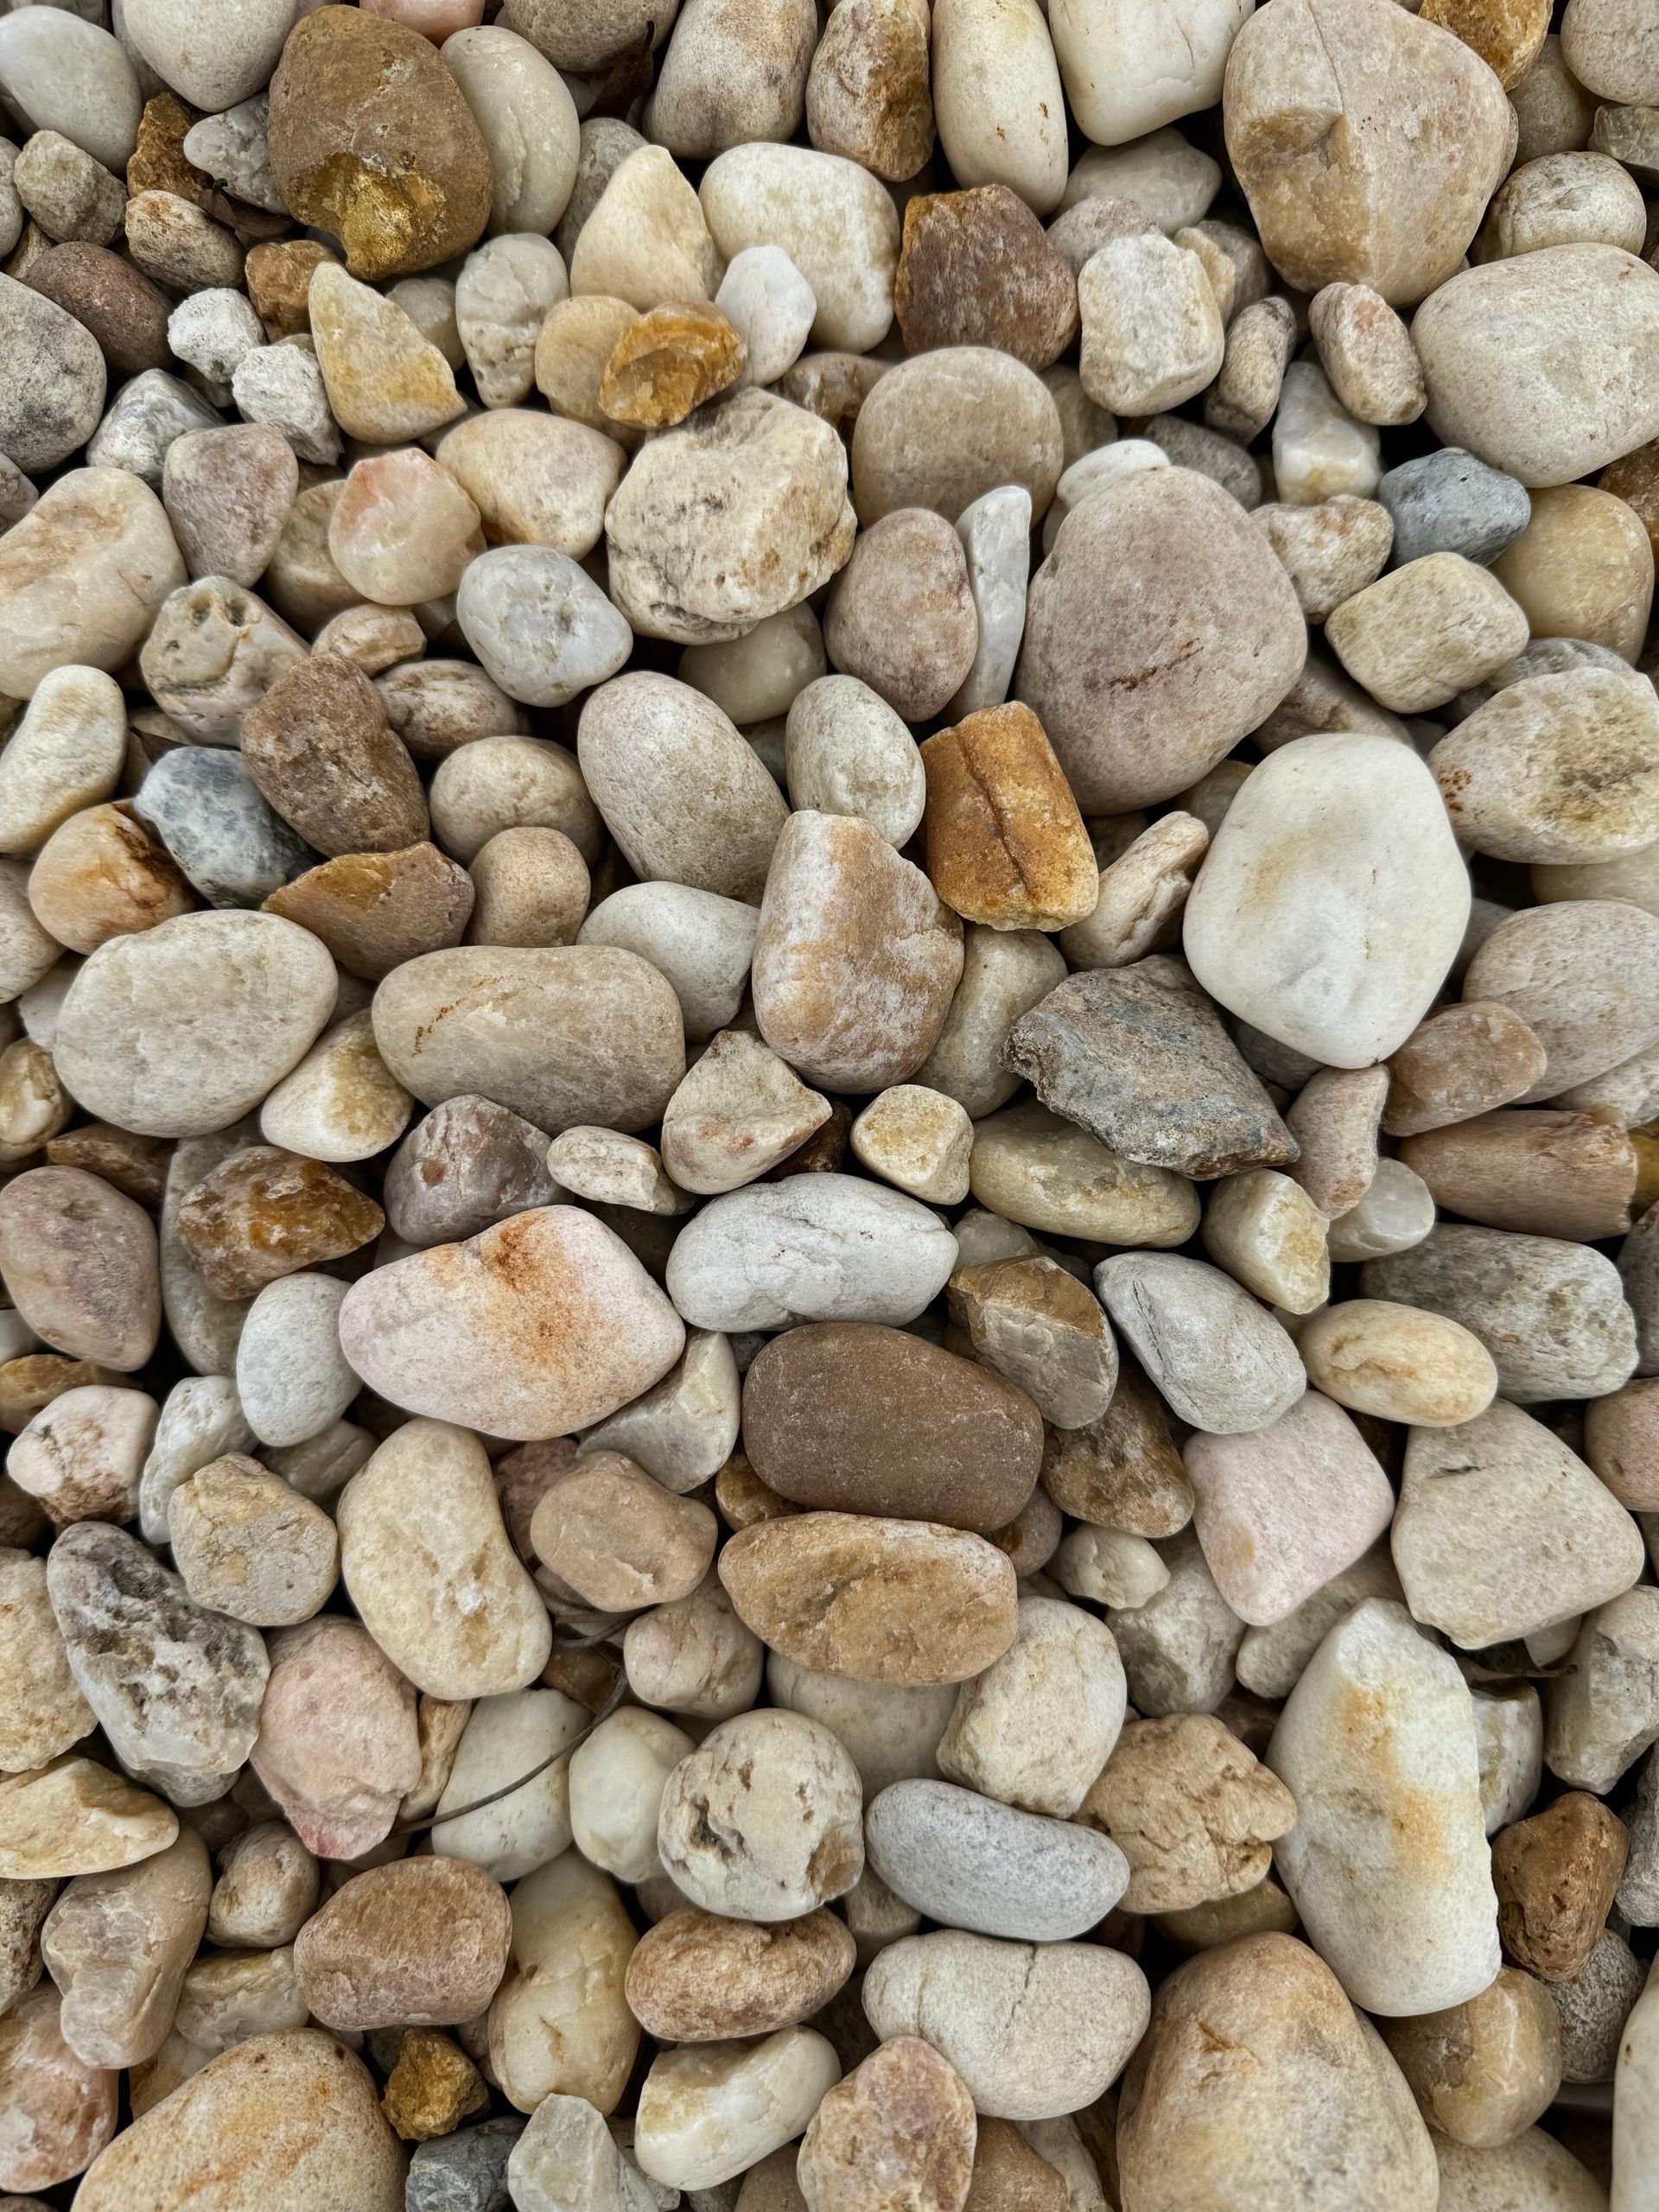 Gray granite - Gravel Products in Florida